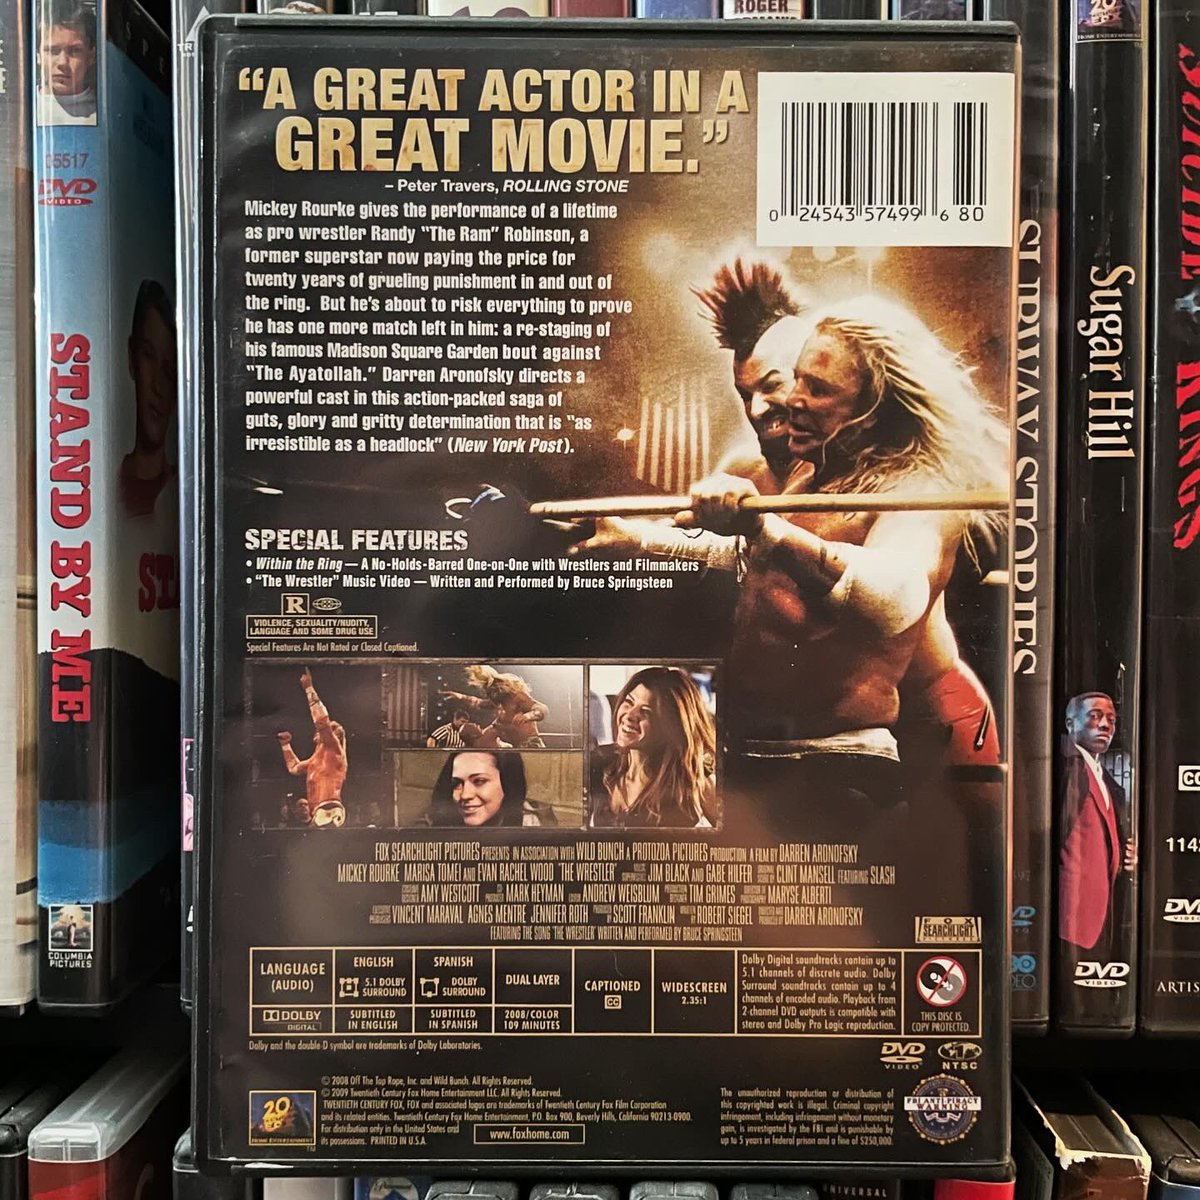 “The only place I get hurt is out there. The world don’t give a shit about me”
#thewrestler #2008movie #darrenaronofsky #marisatomei #evanrachelwood #clintmansell #robertsiegel #toddbarry #markmargolis #judahfriedlander #wrestlingmovie #dvd